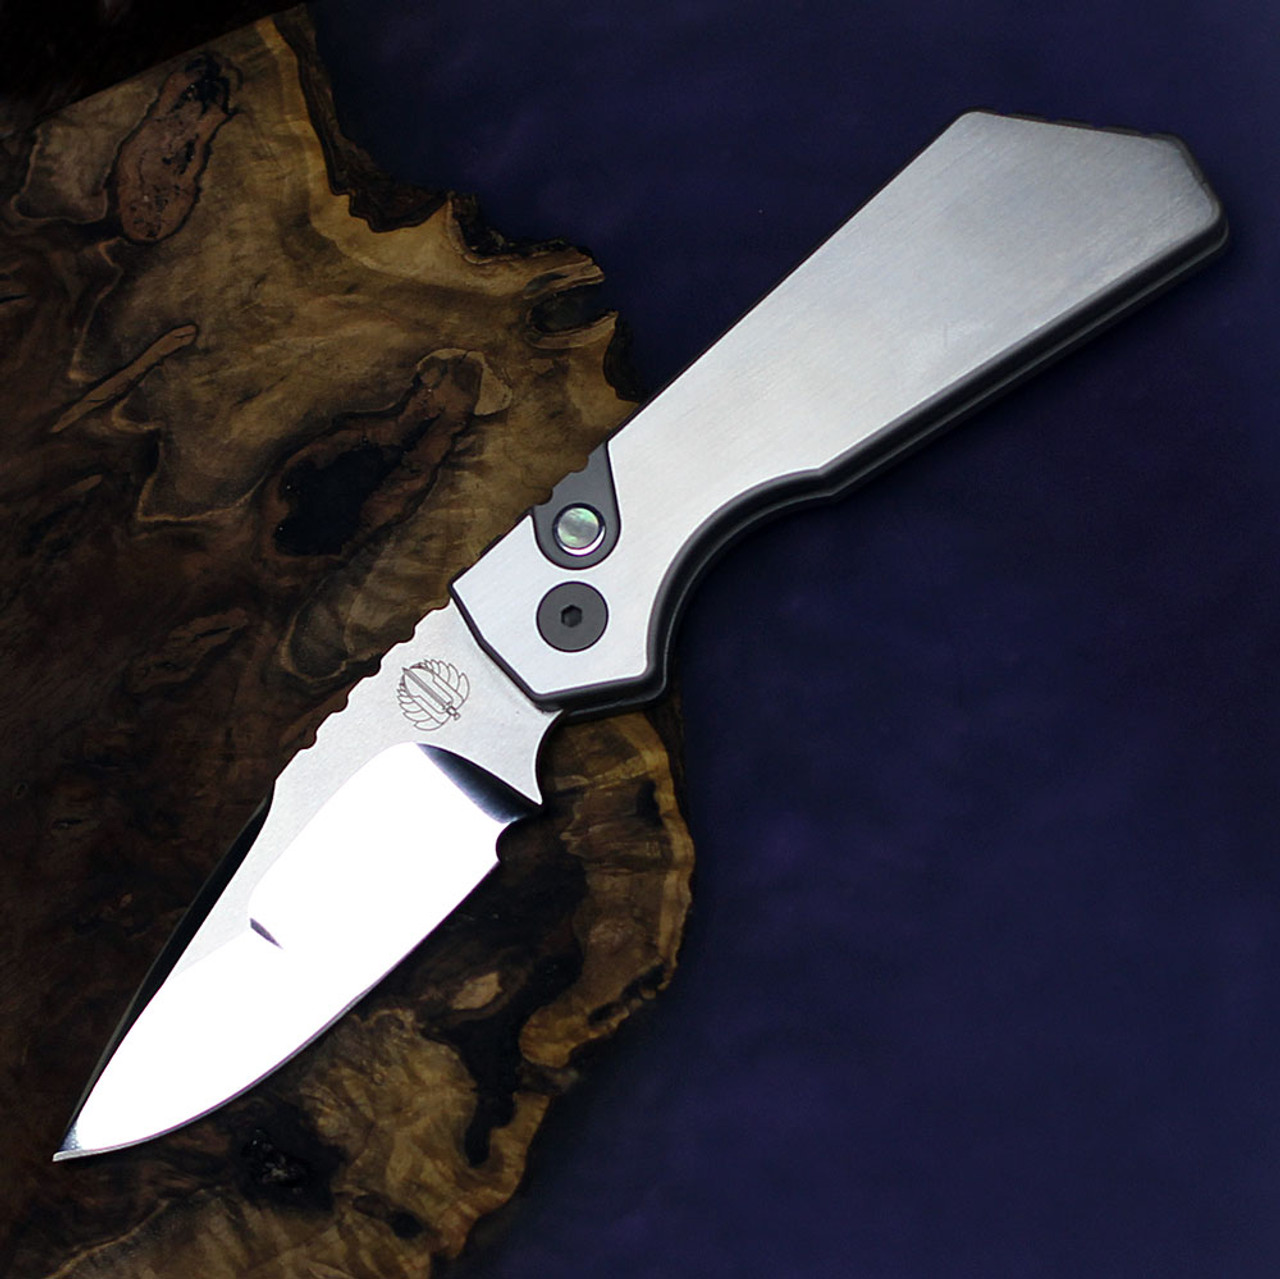 Pro-Tech 2023 Strider PT+ Custom 005 Strider - 3.06" CPM-154CM, Satin/Blasted Chamfers 17-4 Steel Chassis Handle with Mother of Pearl Push Button